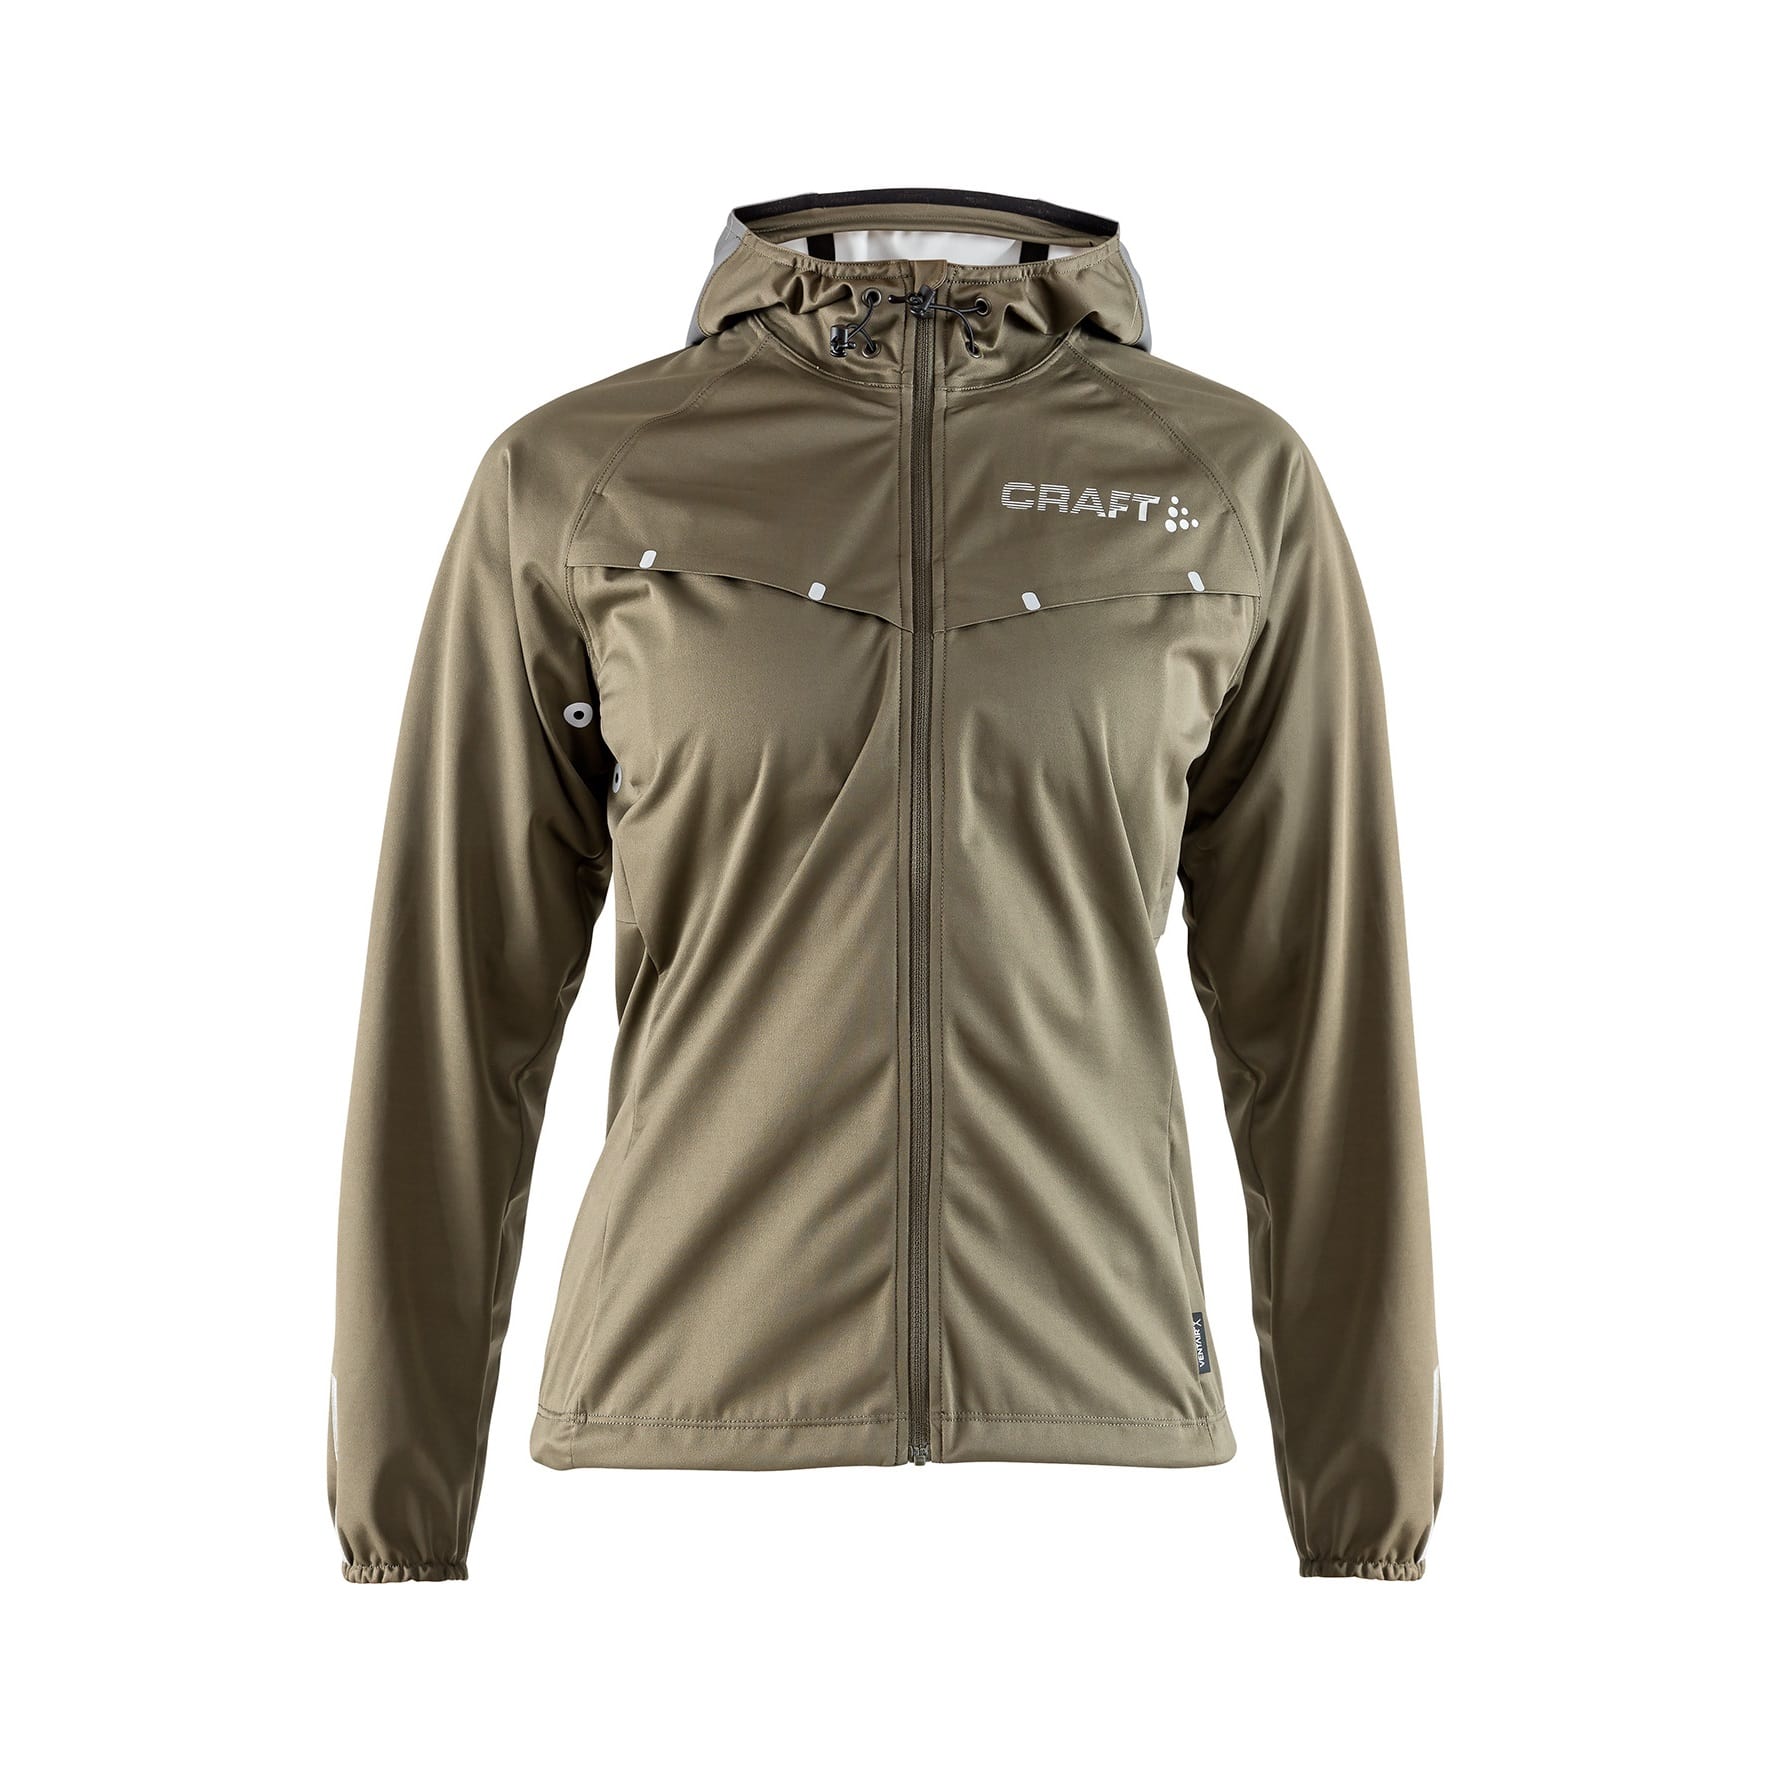 Craft Women's Repel Jacket from Outnorth